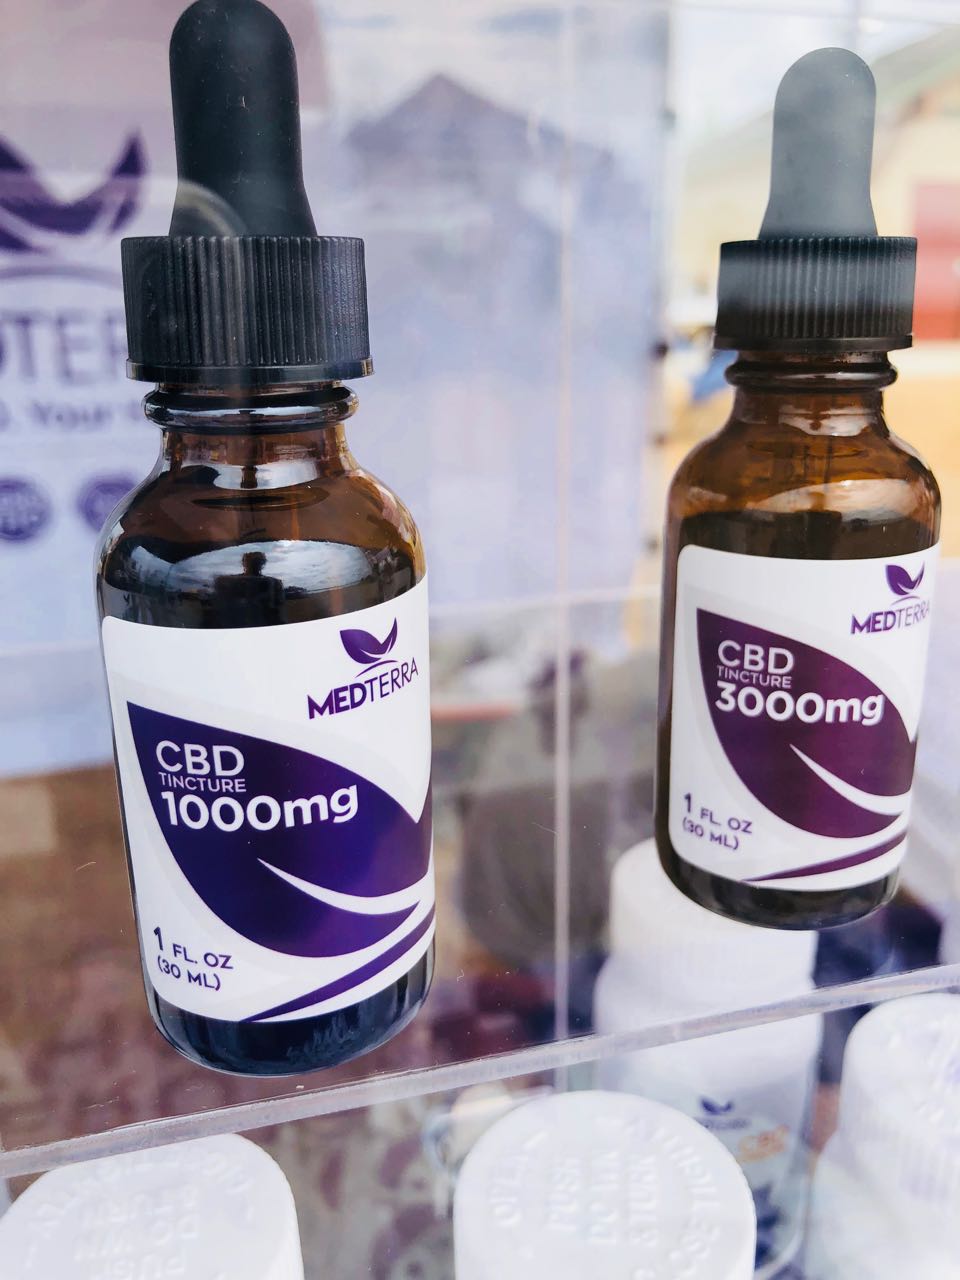 Here Are 20 CBD Products To Try For All Your Ailments